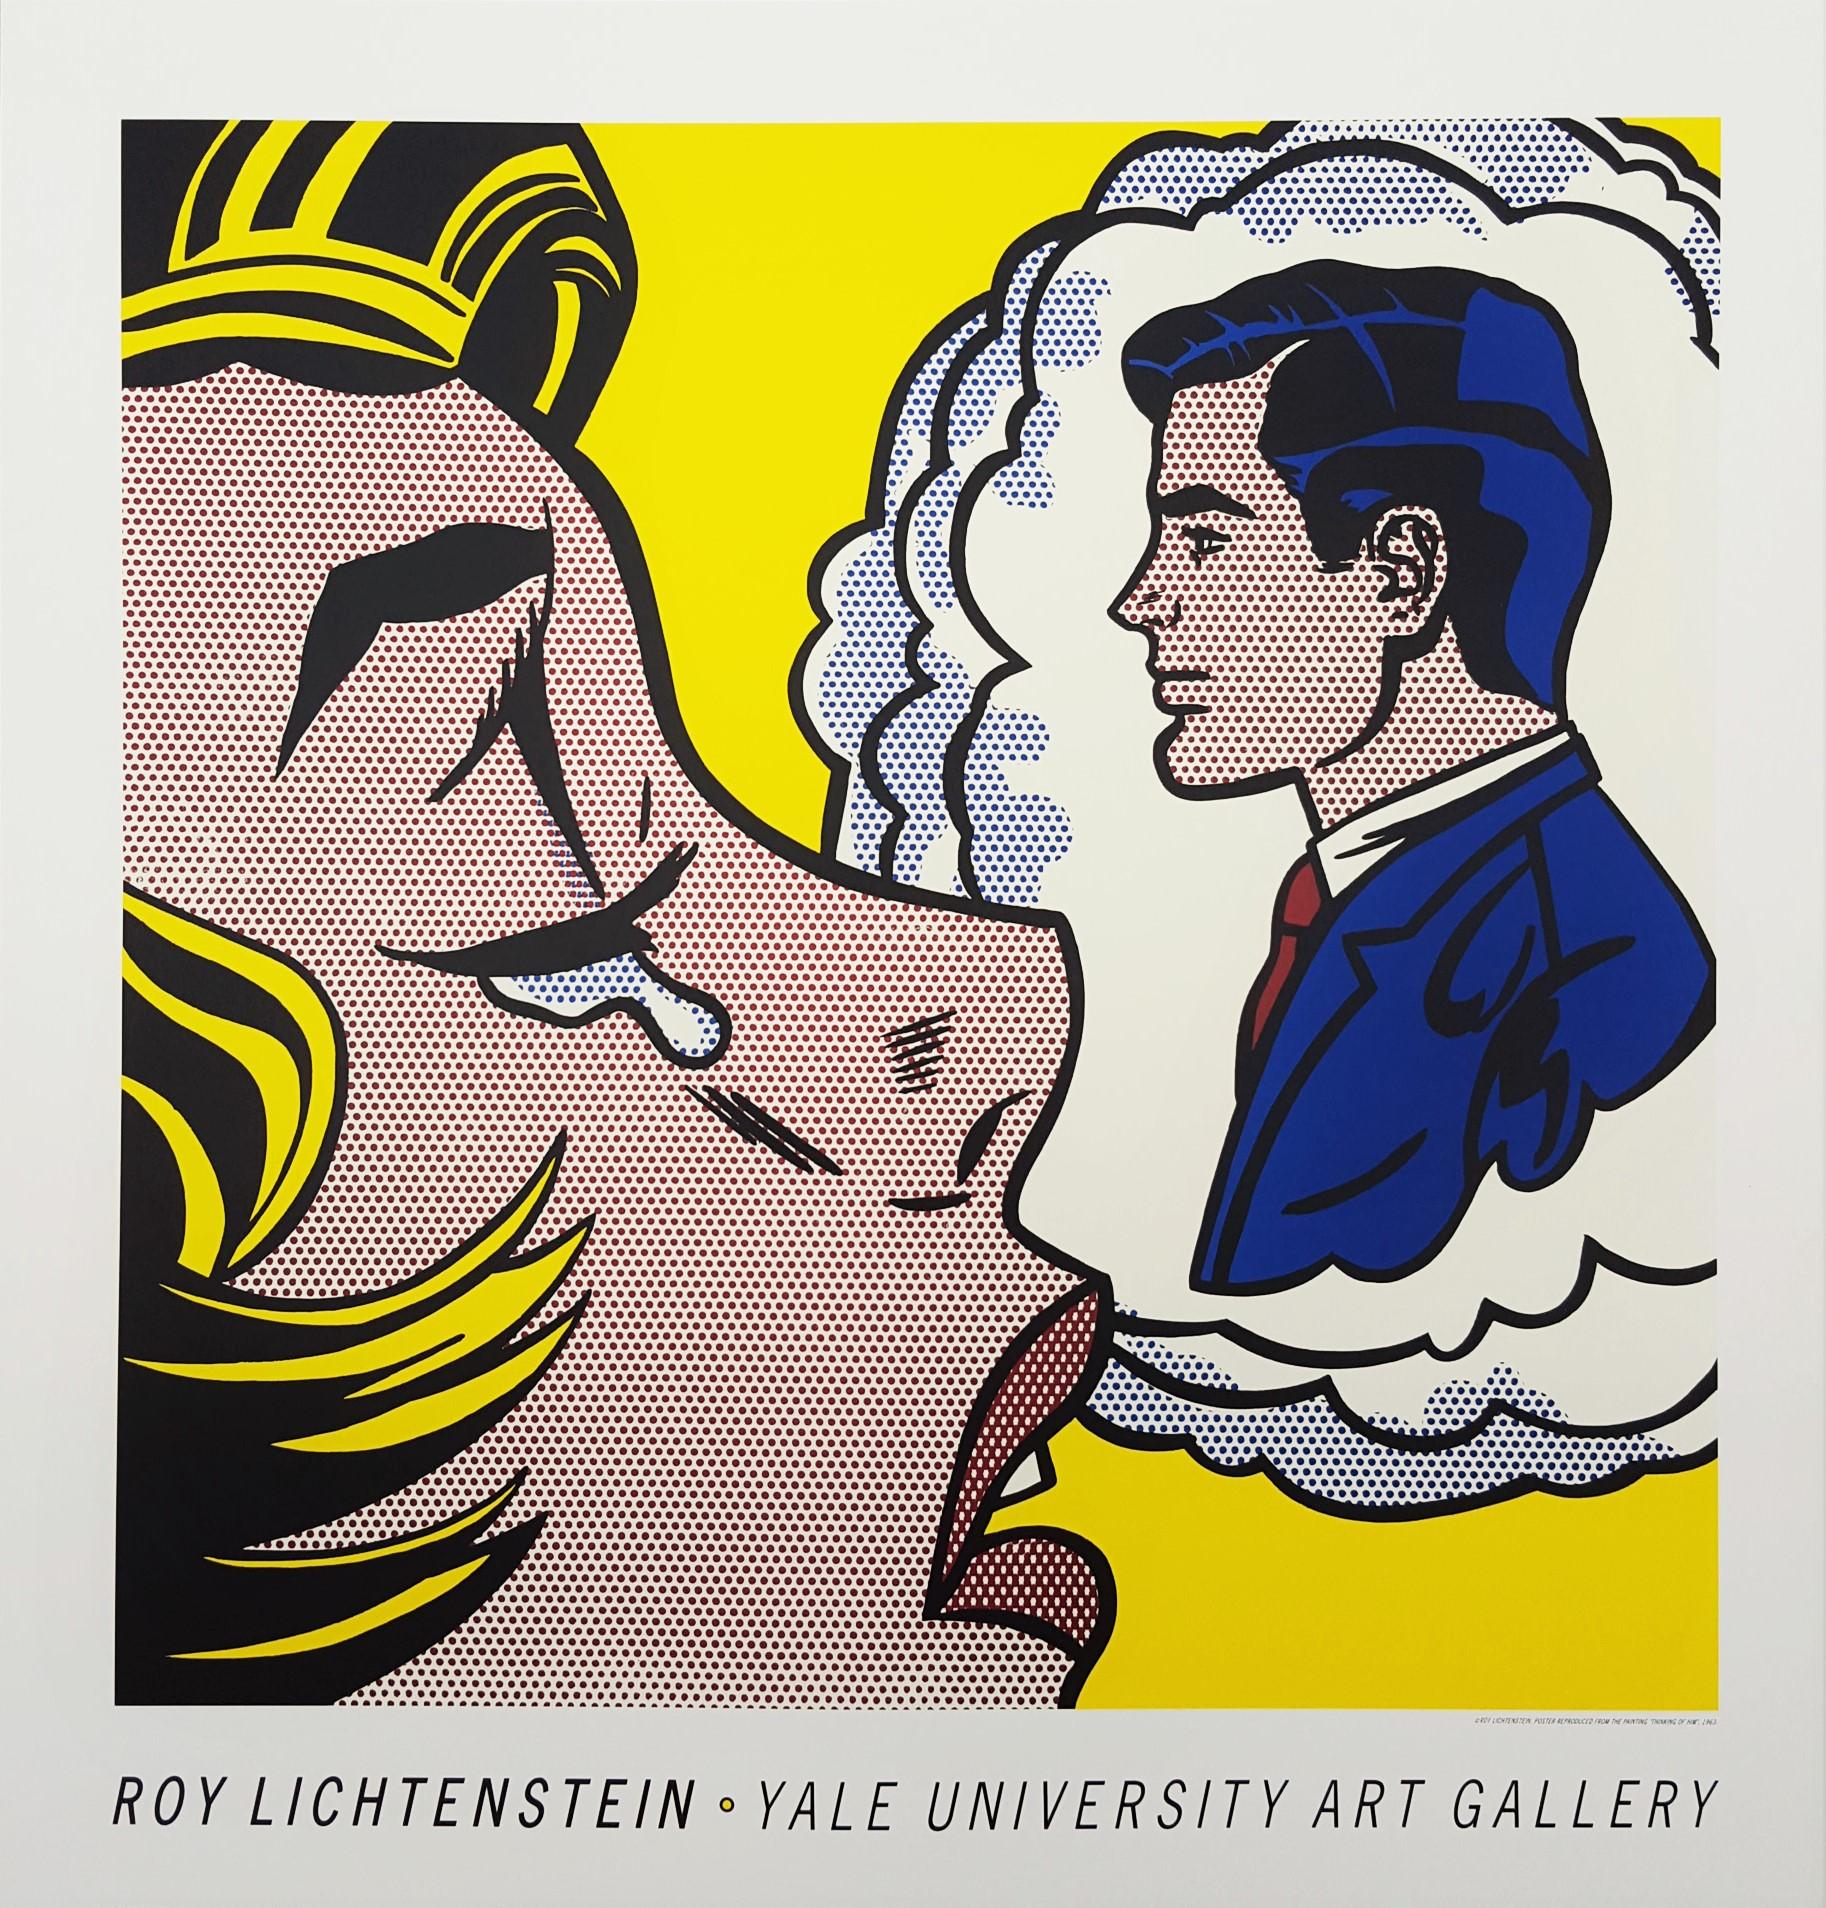 (after) Roy Lichtenstein Figurative Print - Yale University Art Gallery (Thinking of Him) Poster